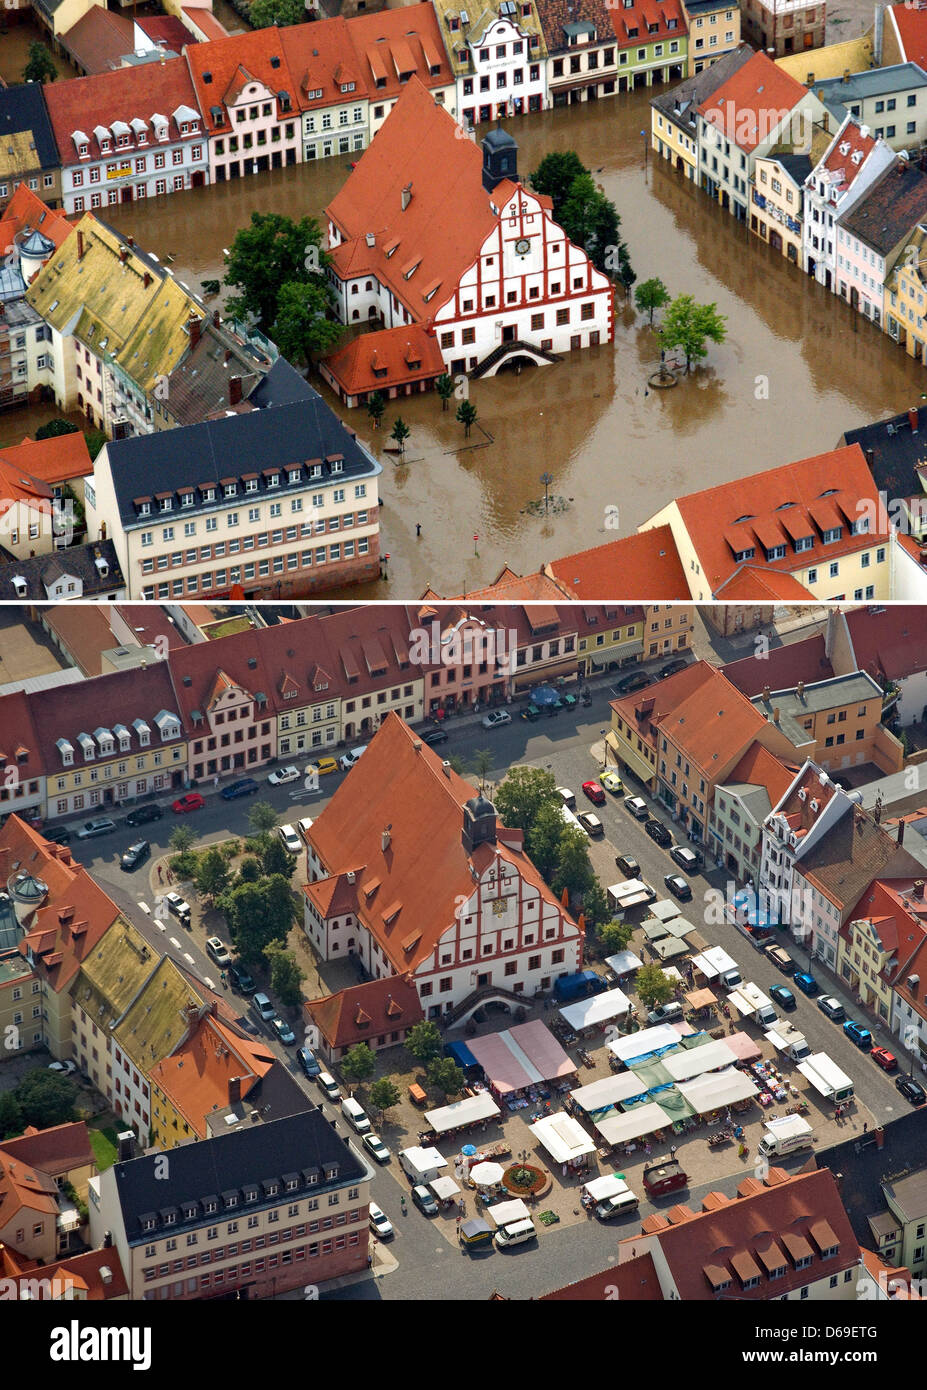 COMBINATION PICTURE - A combination picture shows the city of Grimma which has been flooded by the river Mulde on 14 August 2002 (TOP) and an aerial view of the city hall in Grimma, Germany, 26 July 2012. Grimma was one of the cities most affected by the flood desaster in 2002. Ten years after the flood Grimma is a flourishing town again. Photo: Jan-Peter Kasper Stock Photo